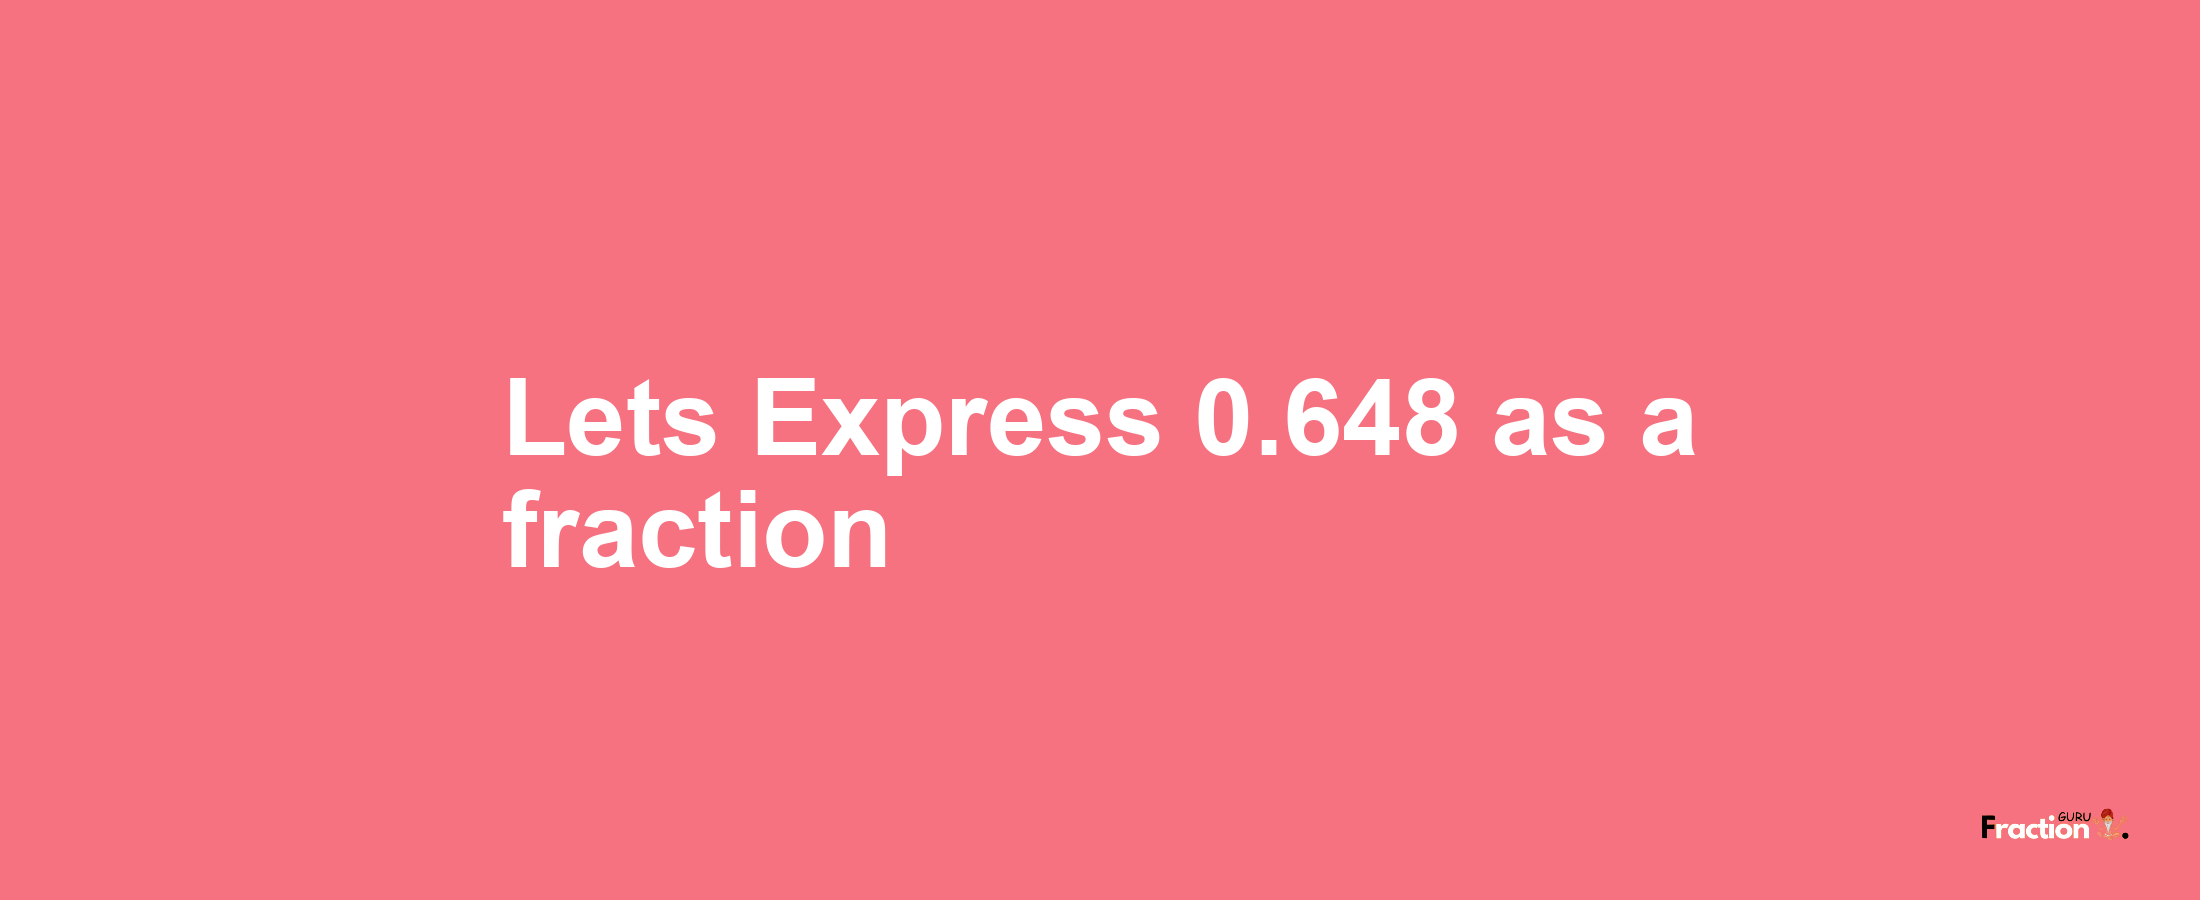 Lets Express 0.648 as afraction